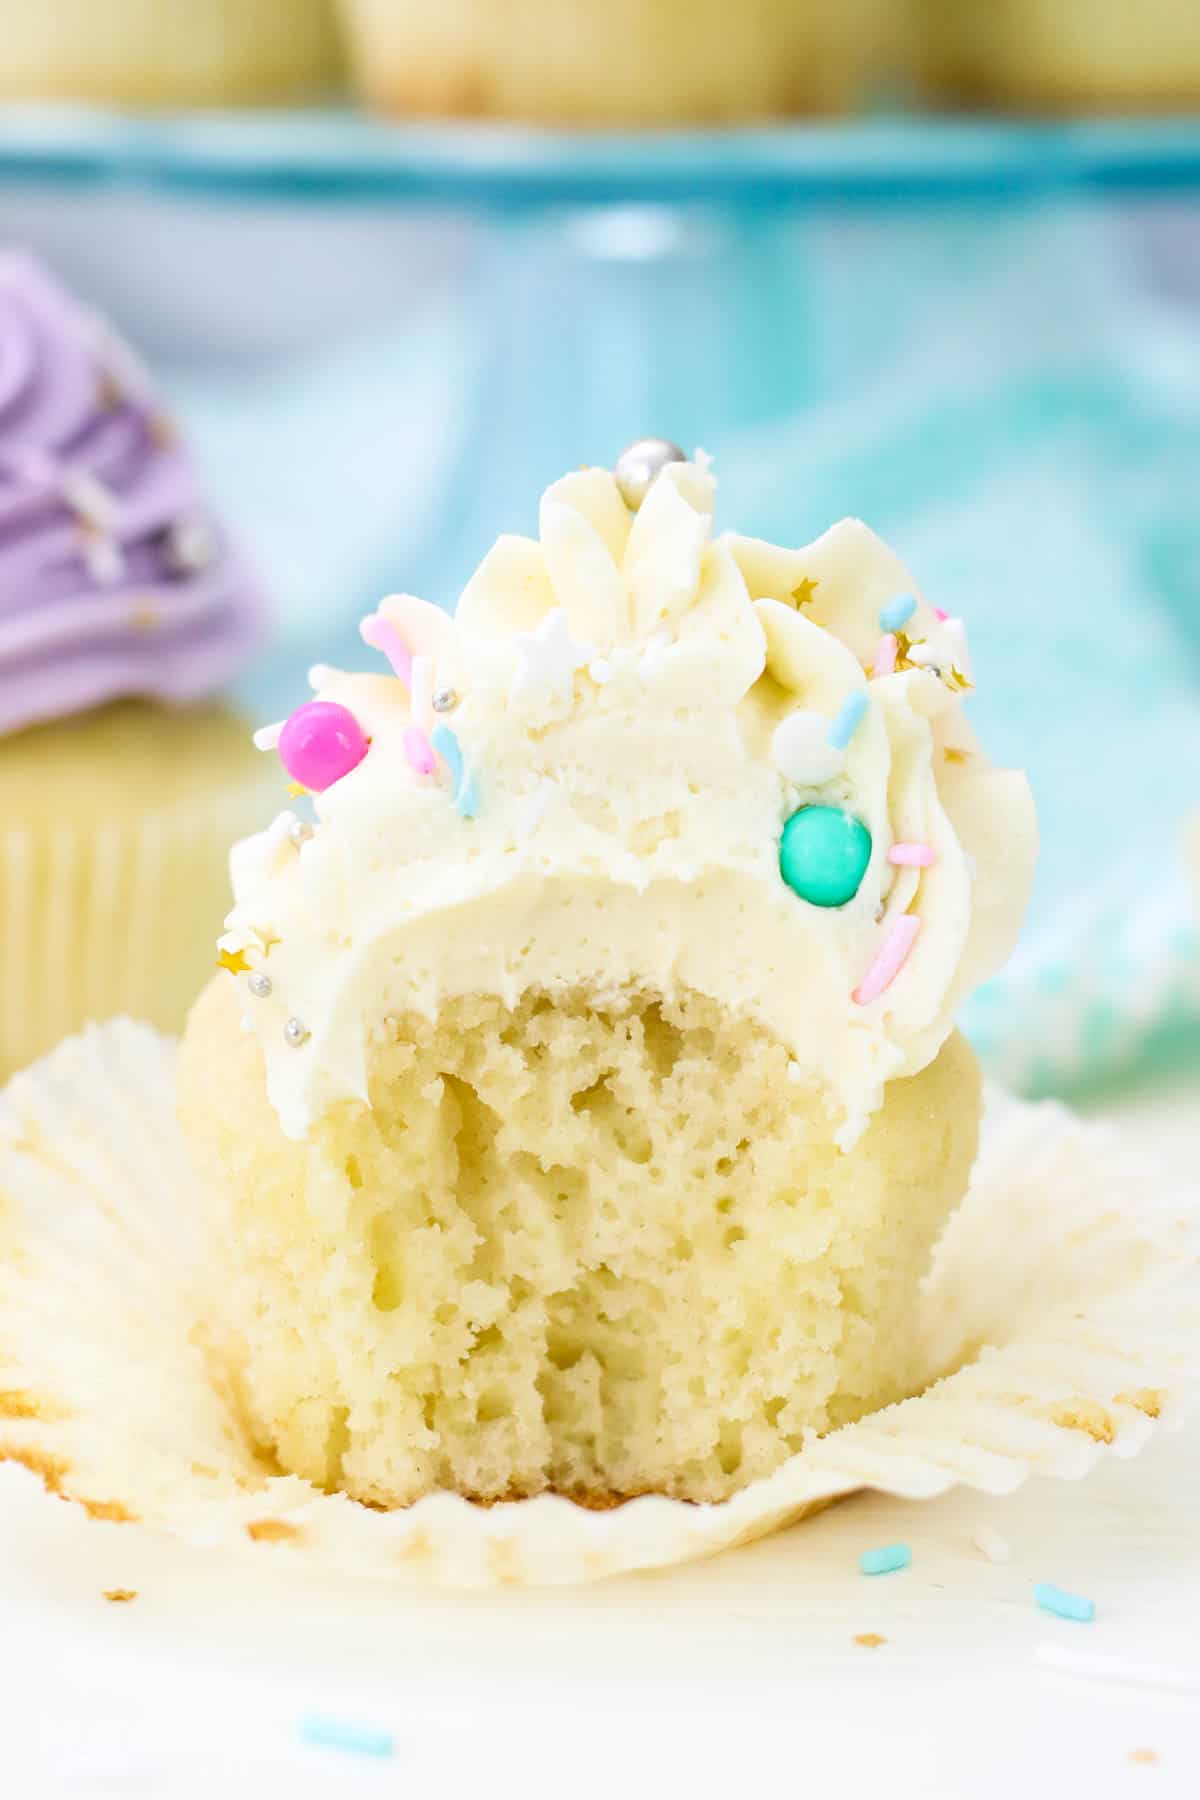 Close up of a vanilla cupcake frosted with a swirl of white Swiss meringue buttercream frosting with a bite missing.